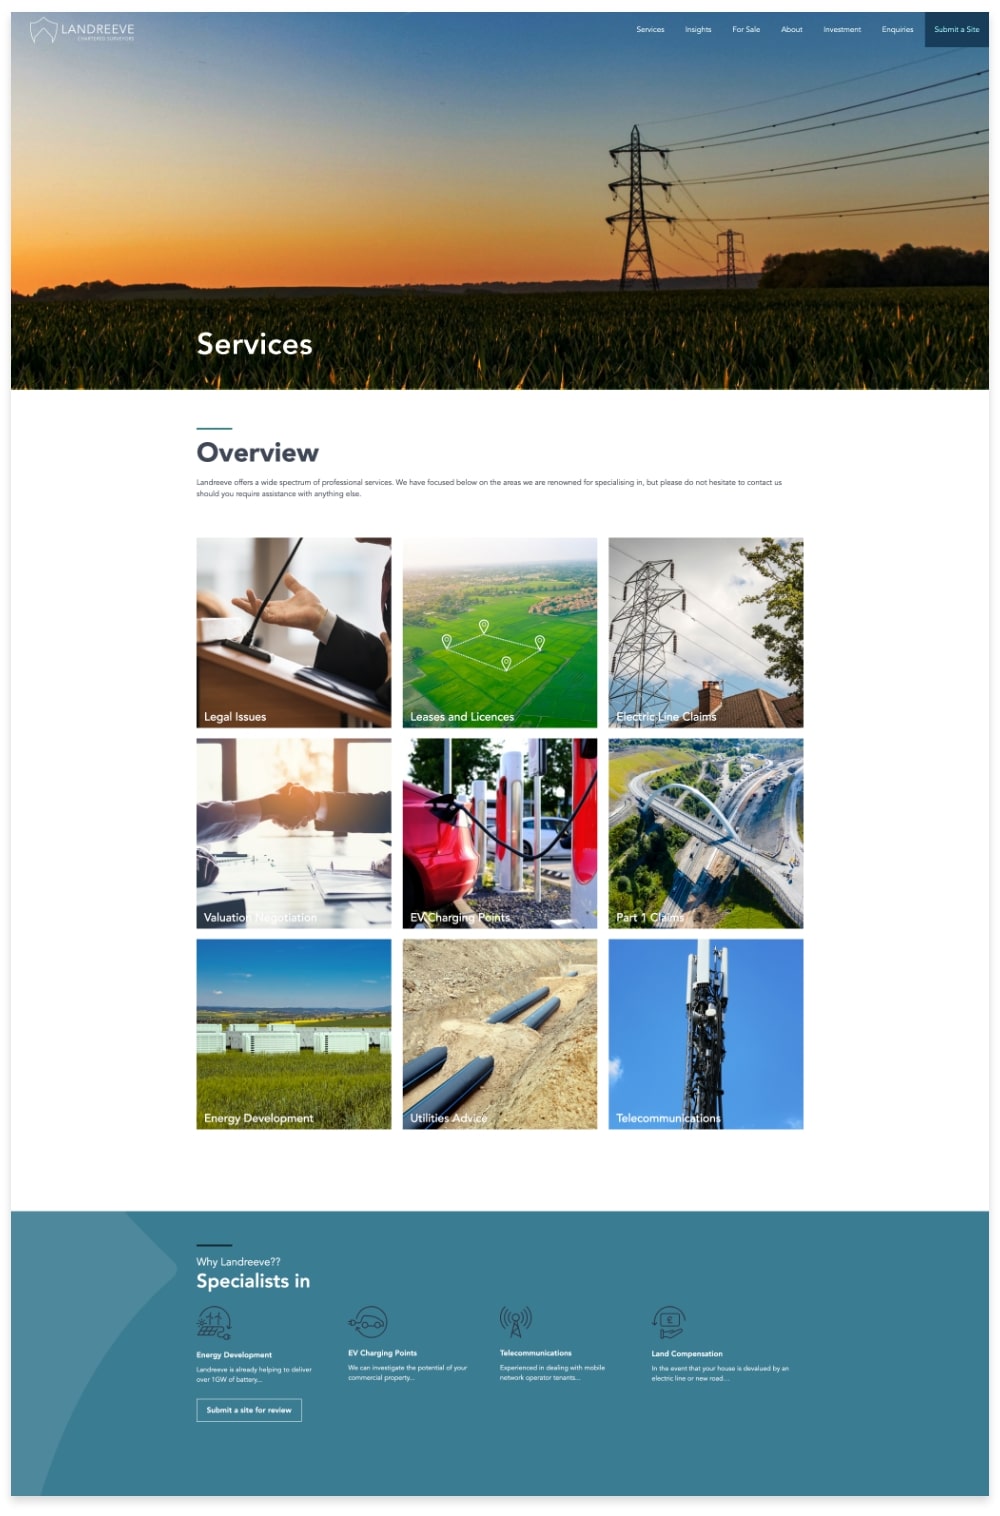 Verve Our Work Landreeve Service Page